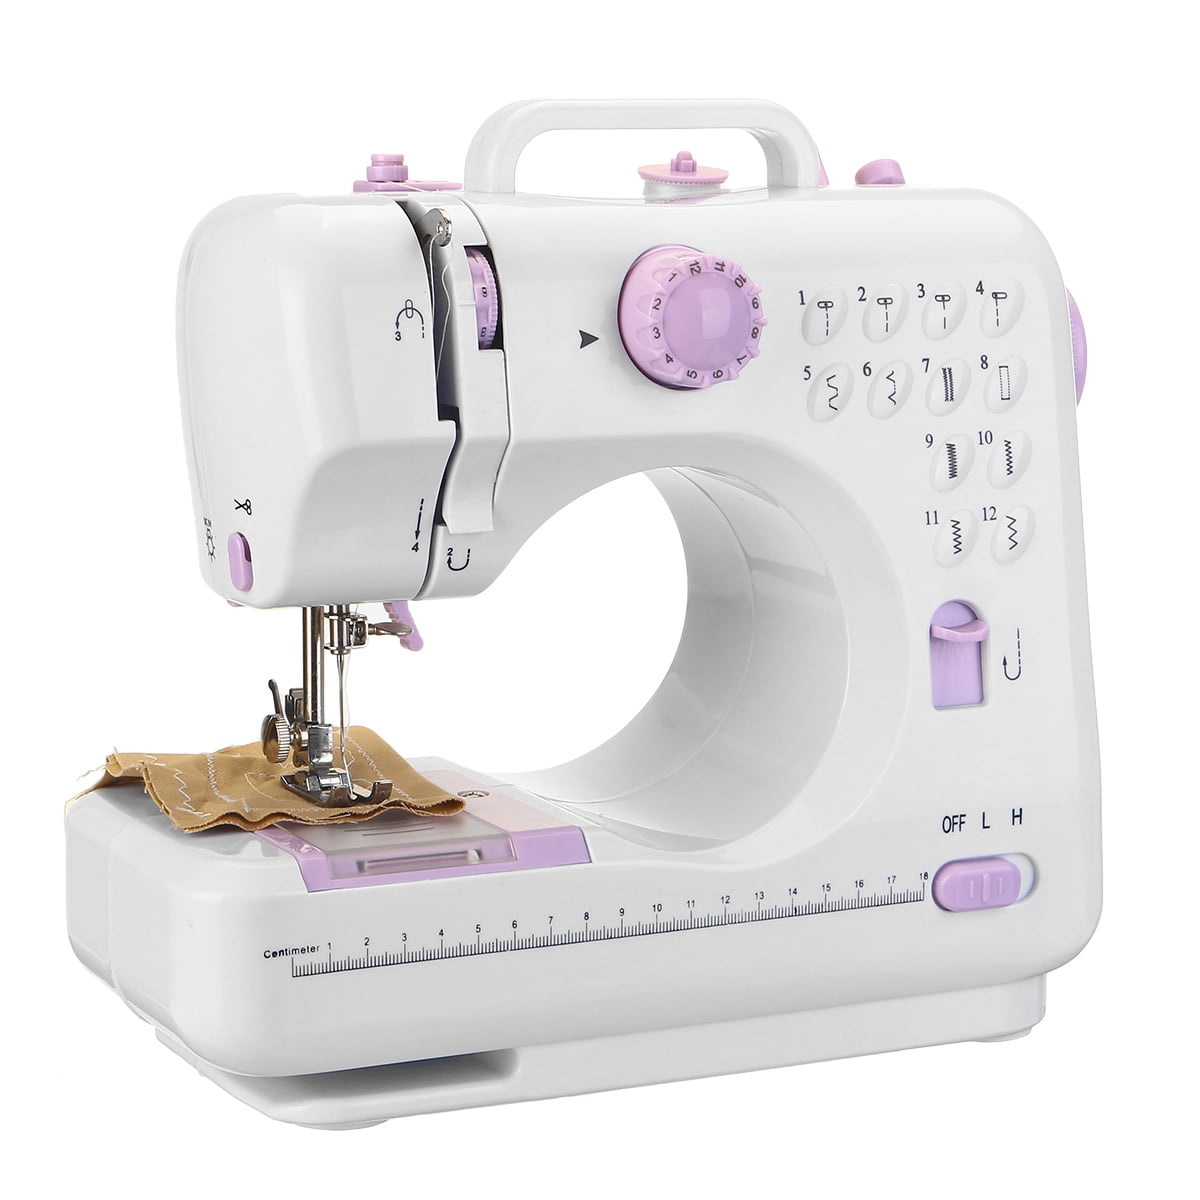 Multifunction Mini Sewing Machine 505A 12 Built-in Stitches 2 Speeds Double Thread Foot Pedal Best for Beginner